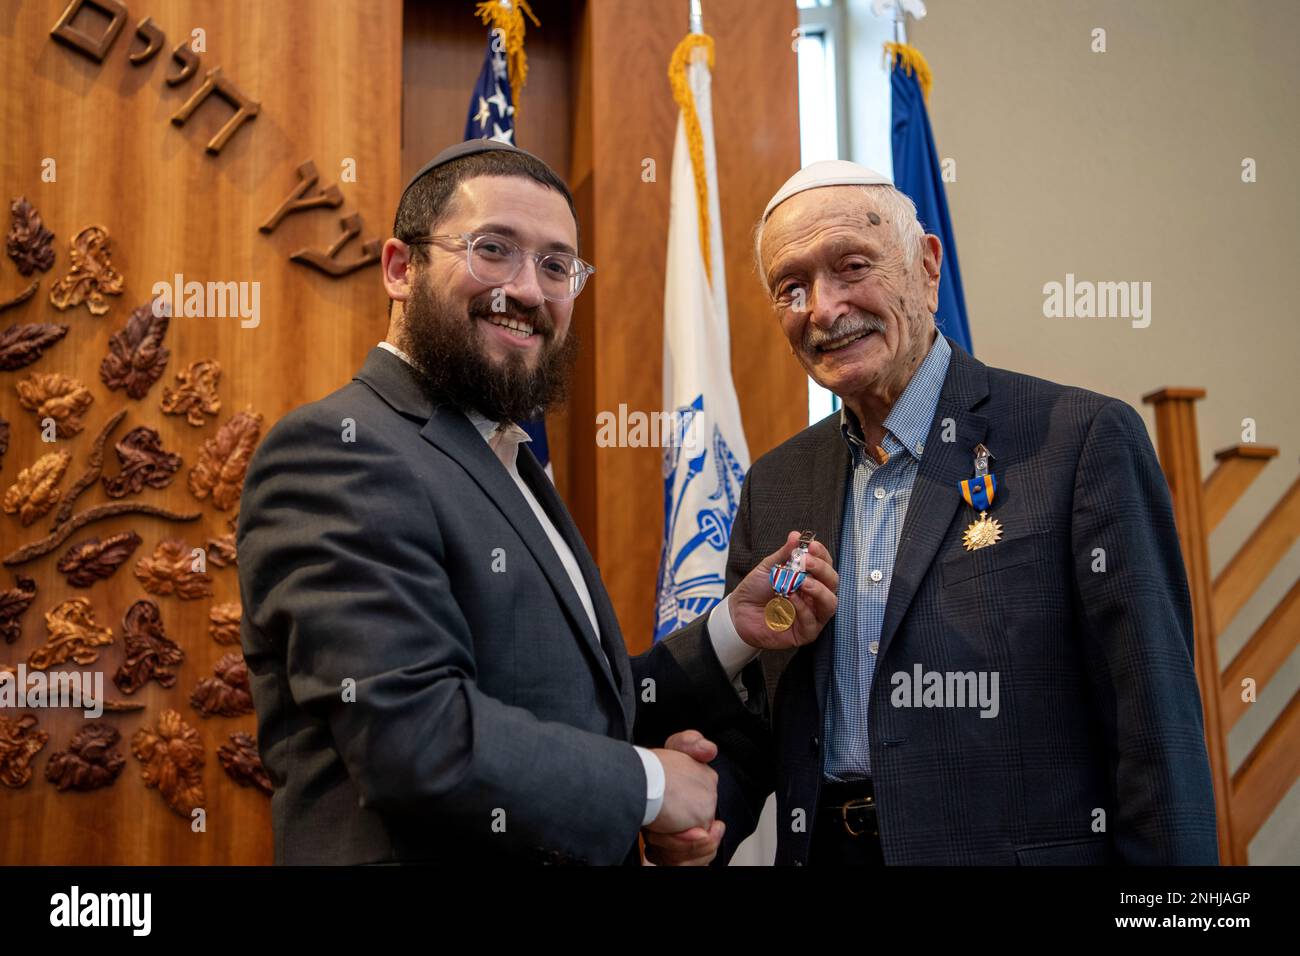 U.S. Army Air Corps 1st Lt. Gerald Teldon (right), retired, receives his award from his grandson, Rabbi Mendel Teldon, for his honorable service as a pilot on July 29, 2022, at the Chabad Center for Jewish Life and Learning, San Antonio, Texas. Teldon, born in Bronx, N.Y., in 1924, joined the military in 1944. He completed 62 missions during WWII and the Korean War. Lt. Col. Andrew Stein, 502nd Operations Support Squadron commander, was the presiding officers. The awards presented to Teldon are as follows: the Air Medal; American Campaign Medal; European – African – Middle Eastern Campaign Med Stock Photo